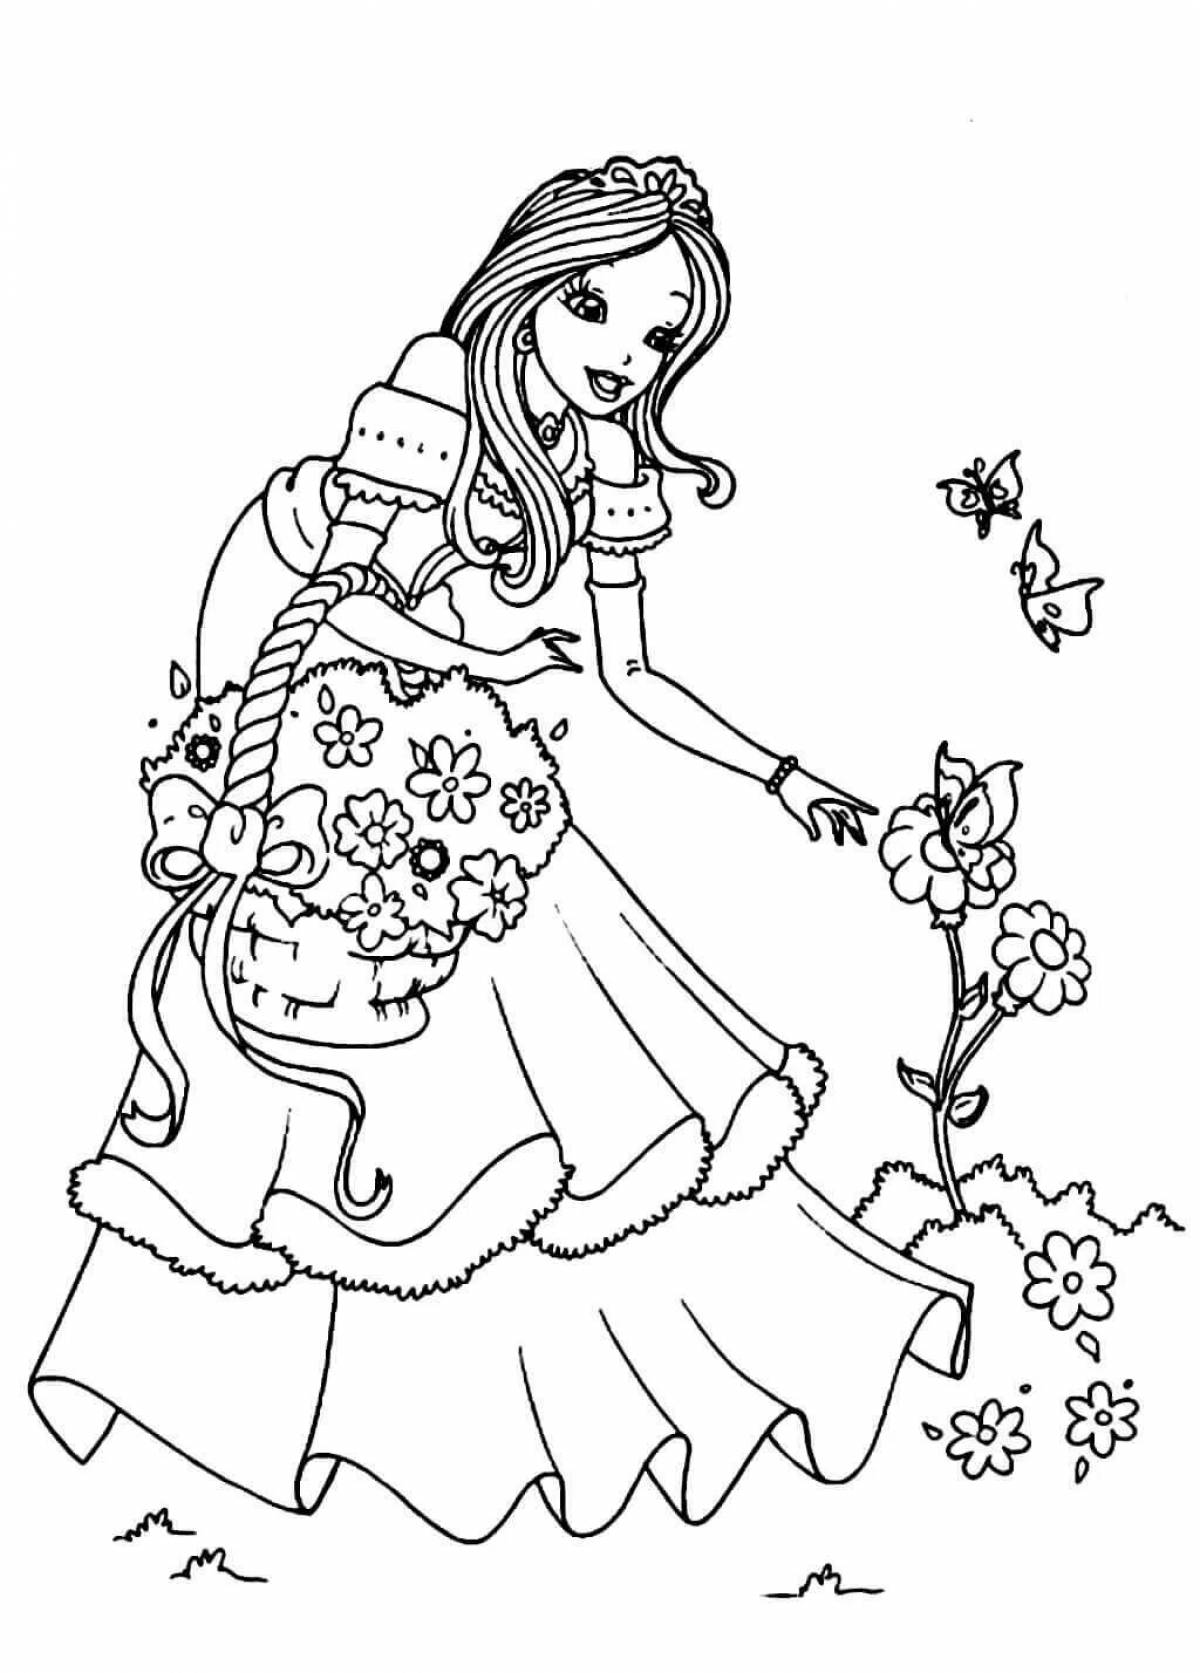 Dreamy princess coloring pages for girls 7 years old